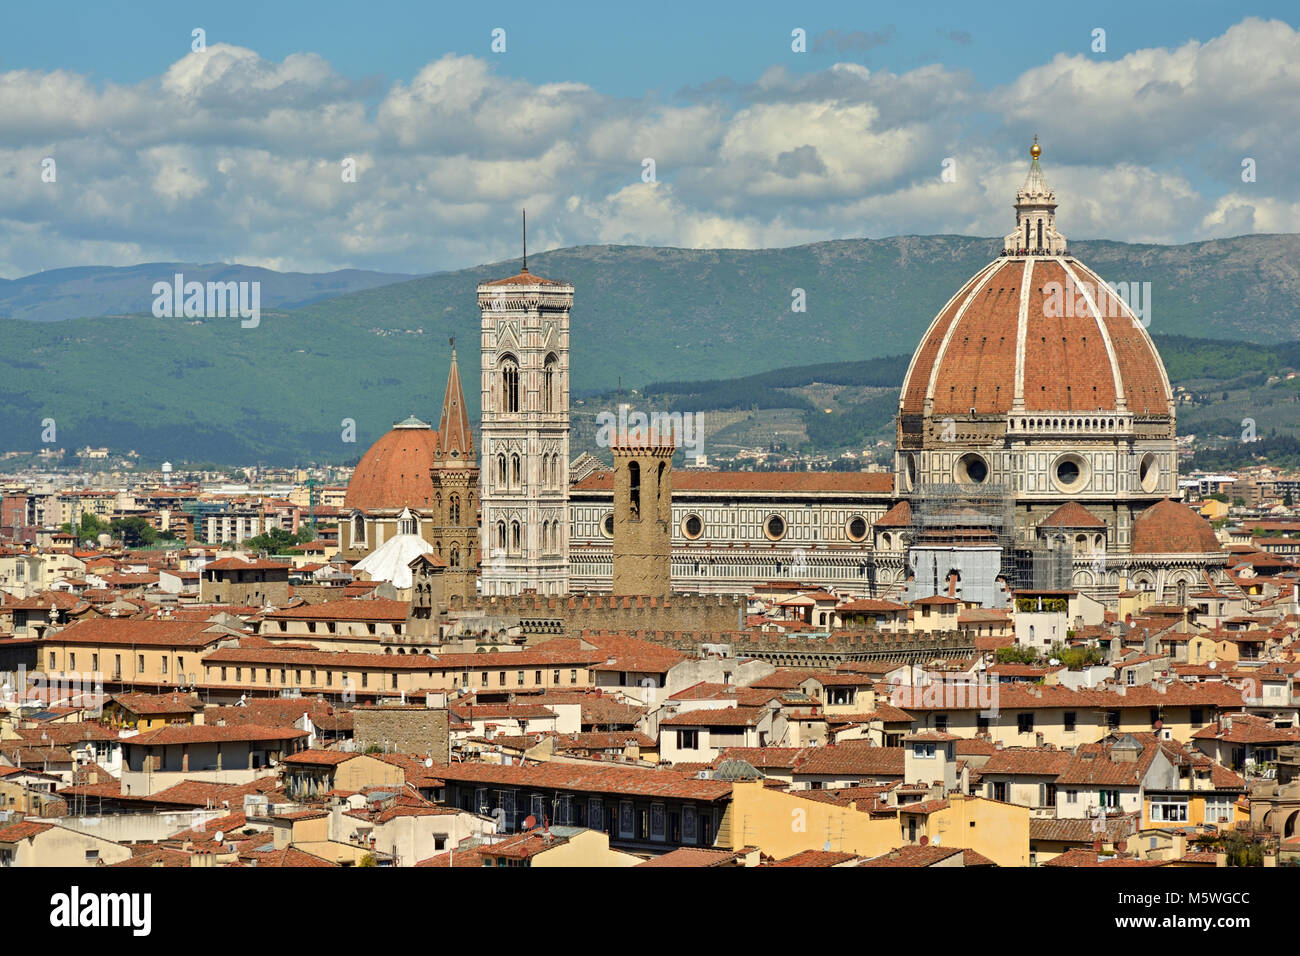 Santa Maria del Fiore cathedral in Florence, also known as The Duomo Stock Photo